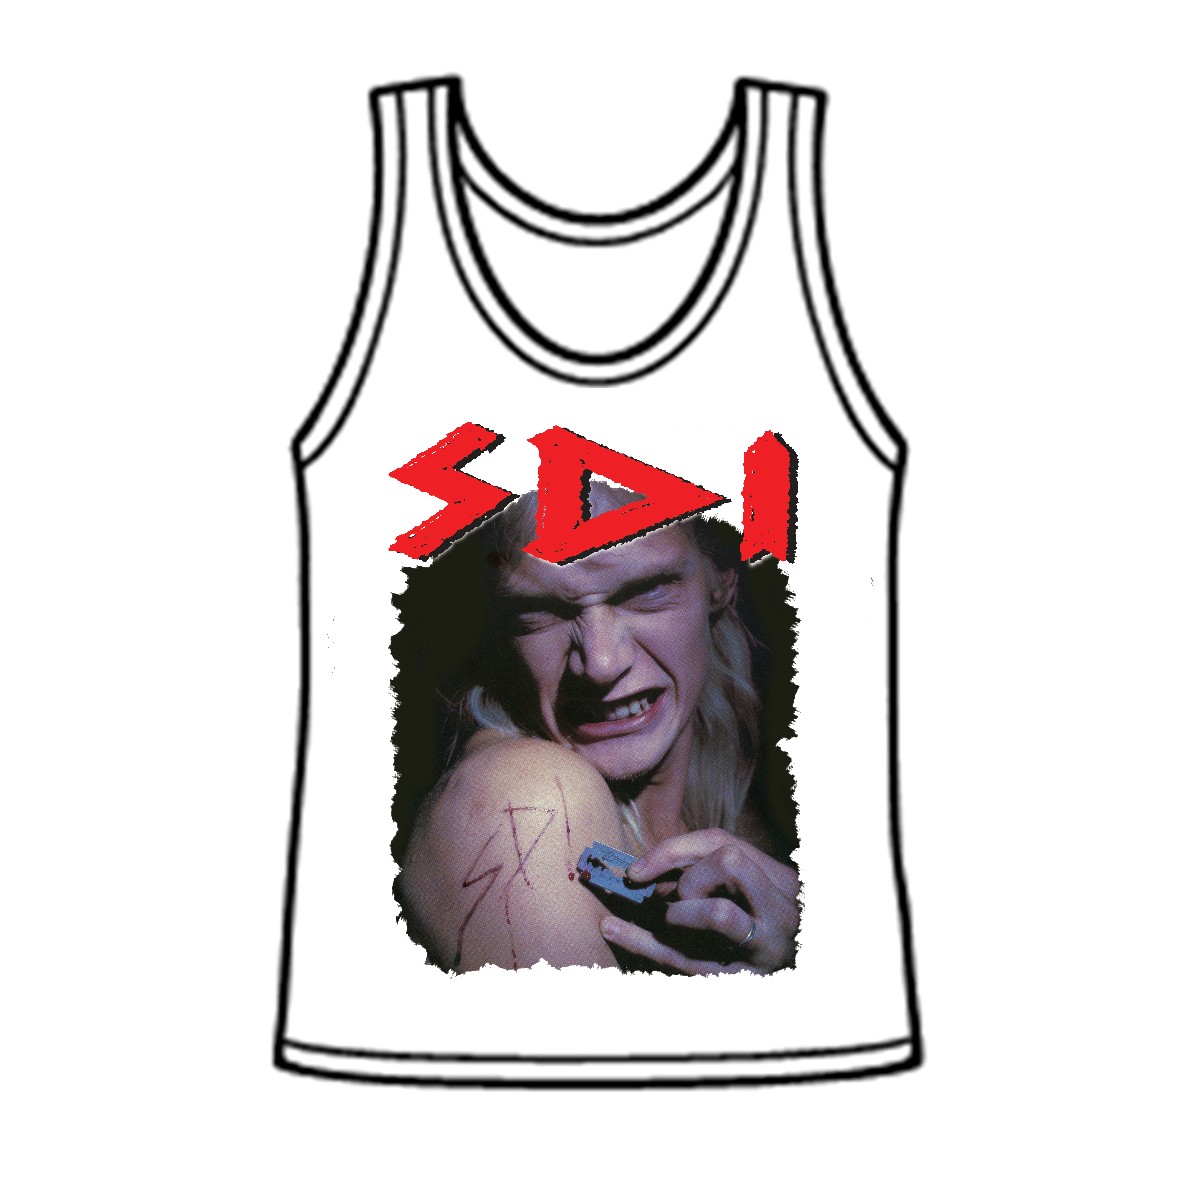 SDI - Sign Of The Wicked Tank Top